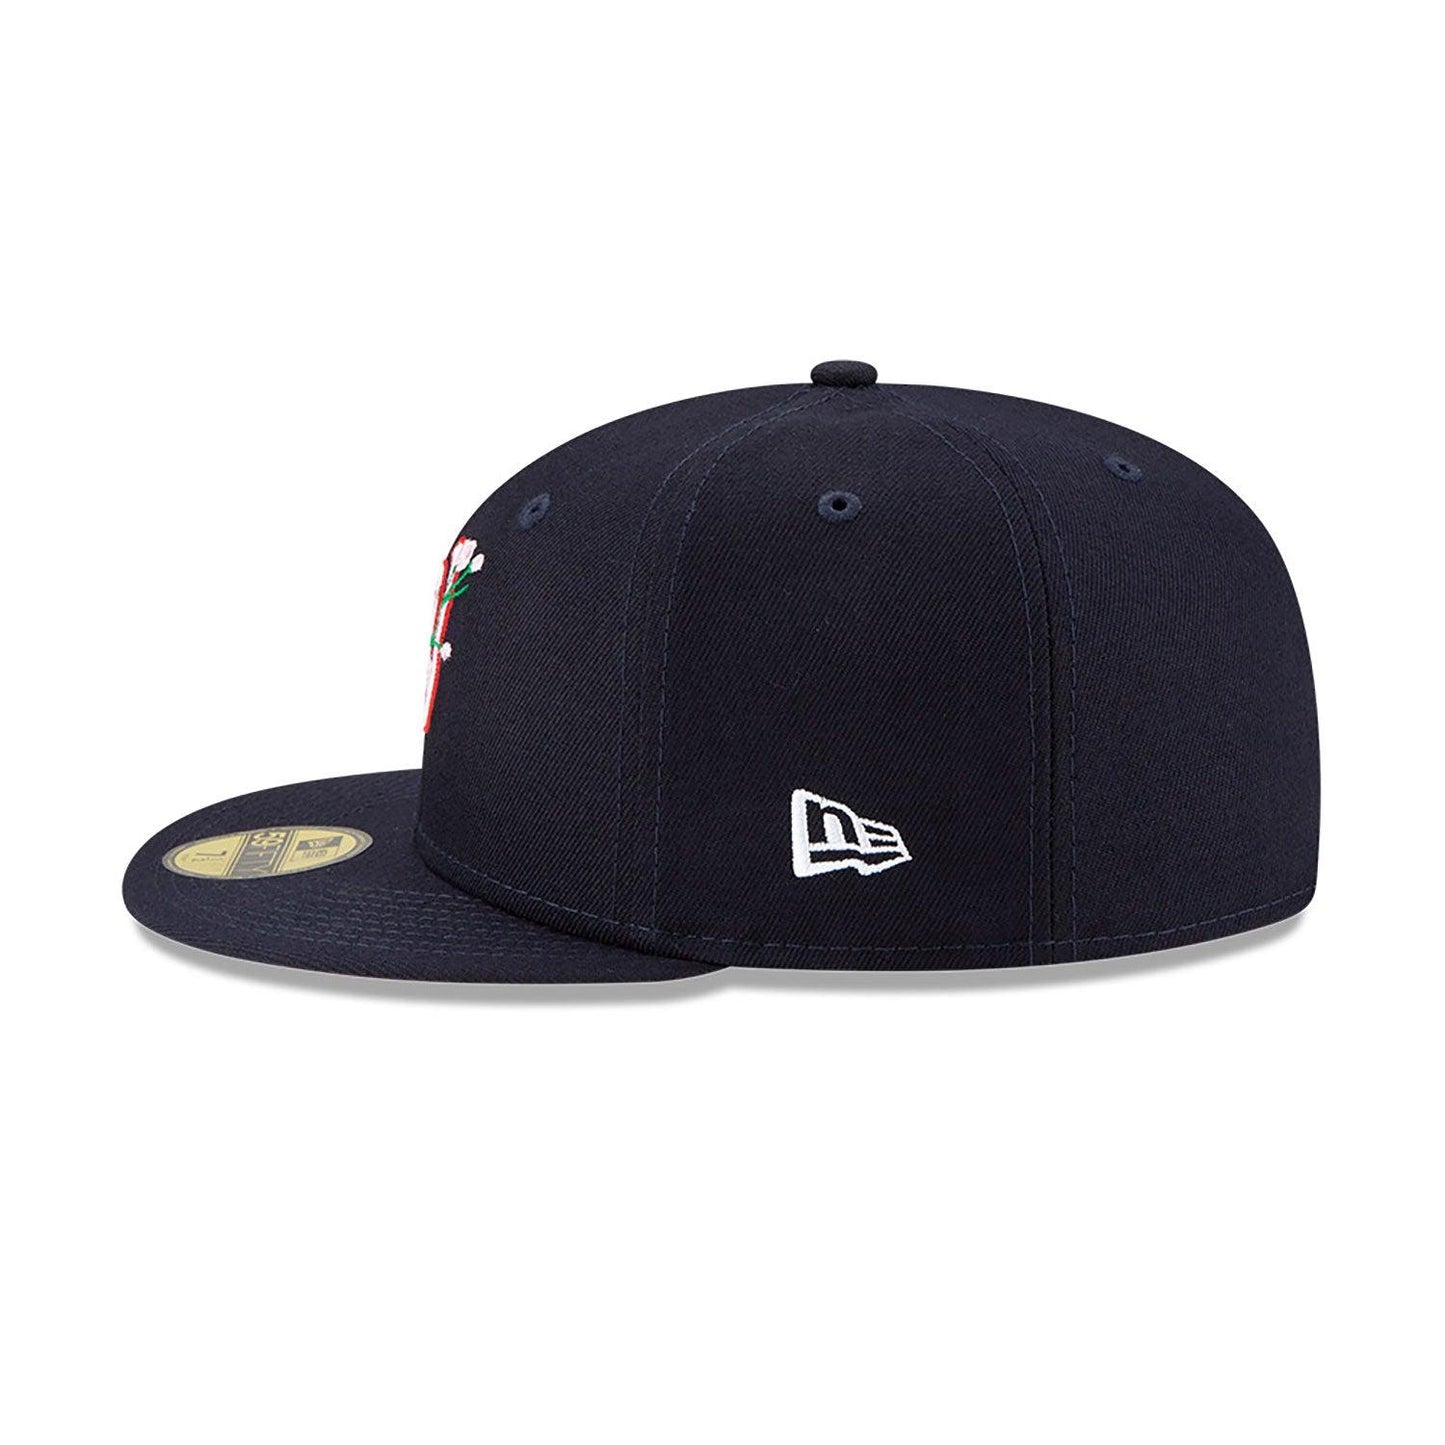 NEW ERA 59FIFTY MLB WASHINGTON NATIONALS SIDE PATCH BLOOM NAVY / PINK UV FITTED CAP